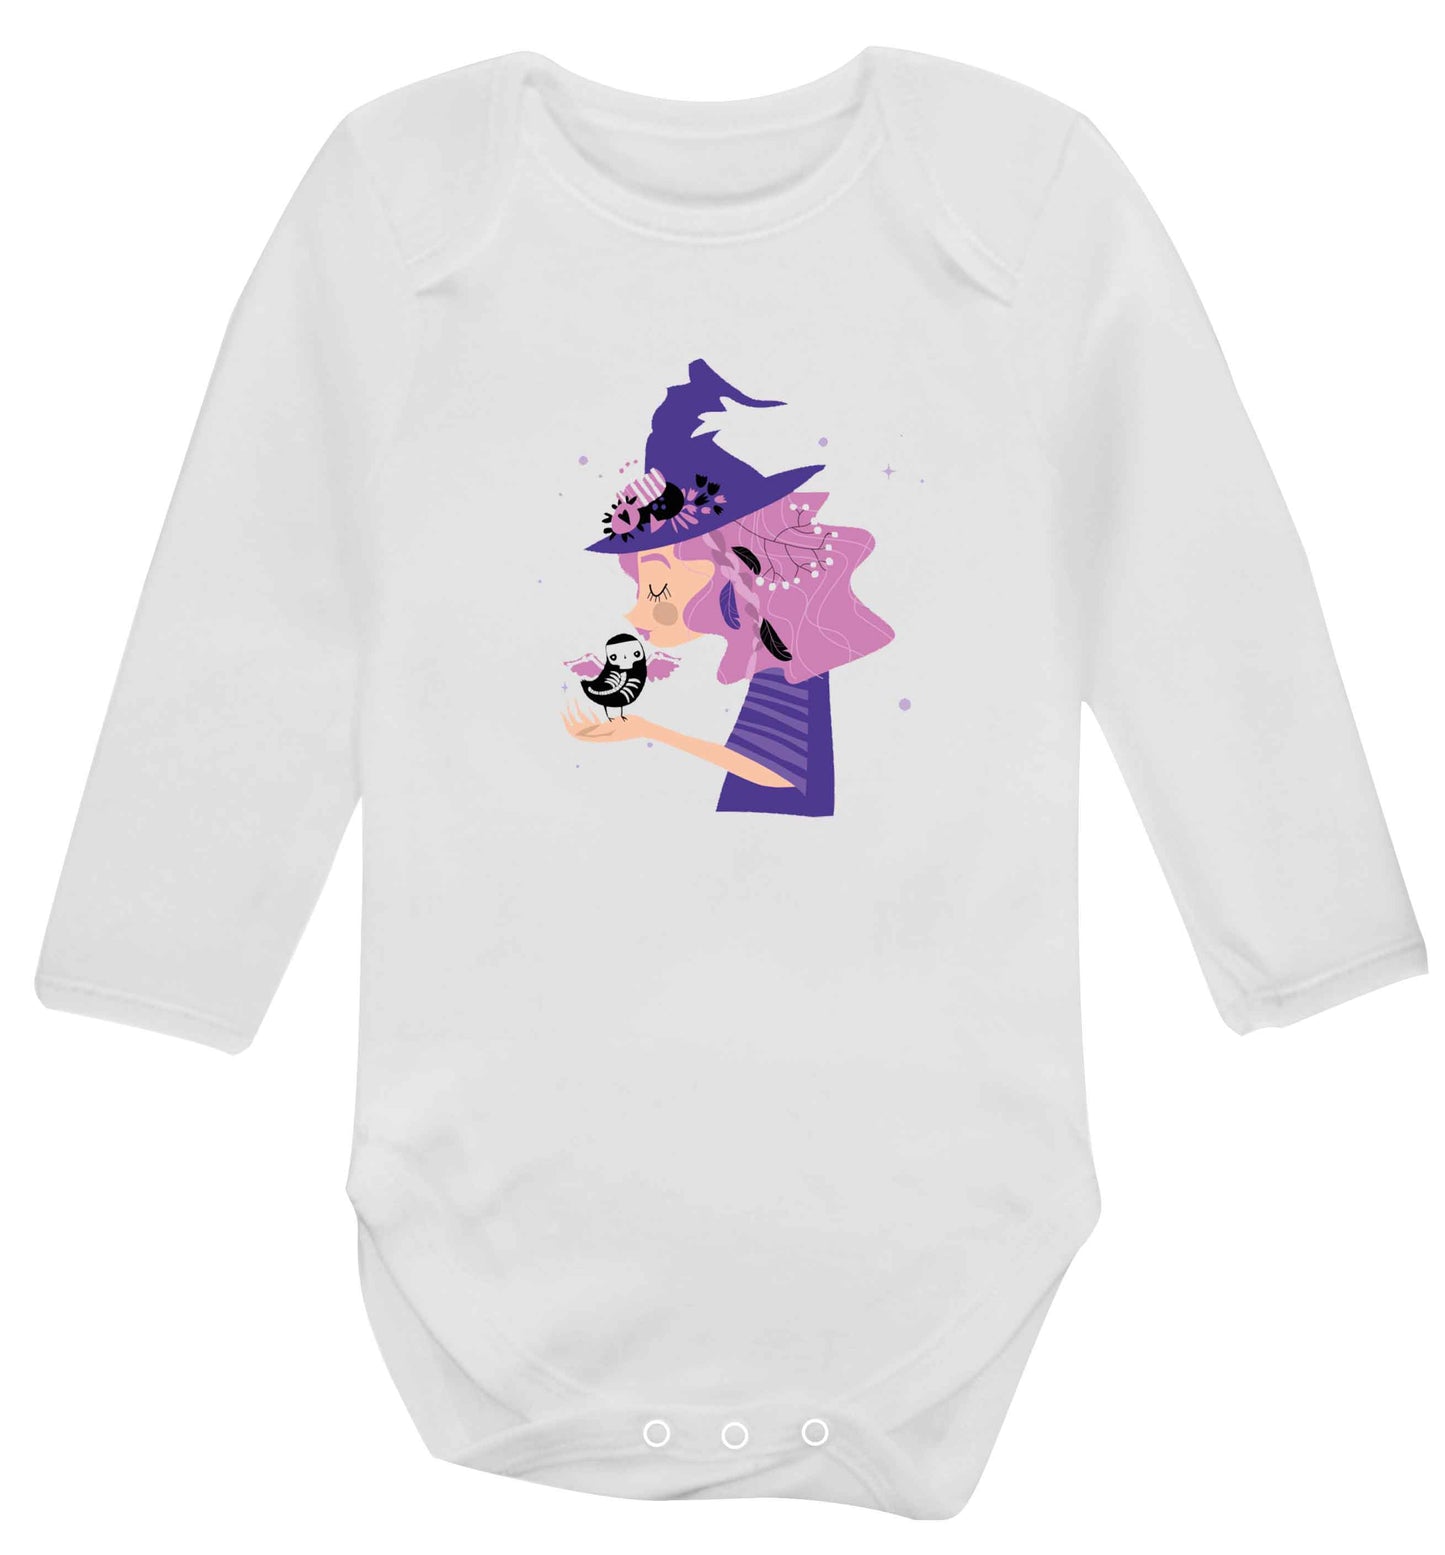 Witch illustration baby vest long sleeved white 6-12 months